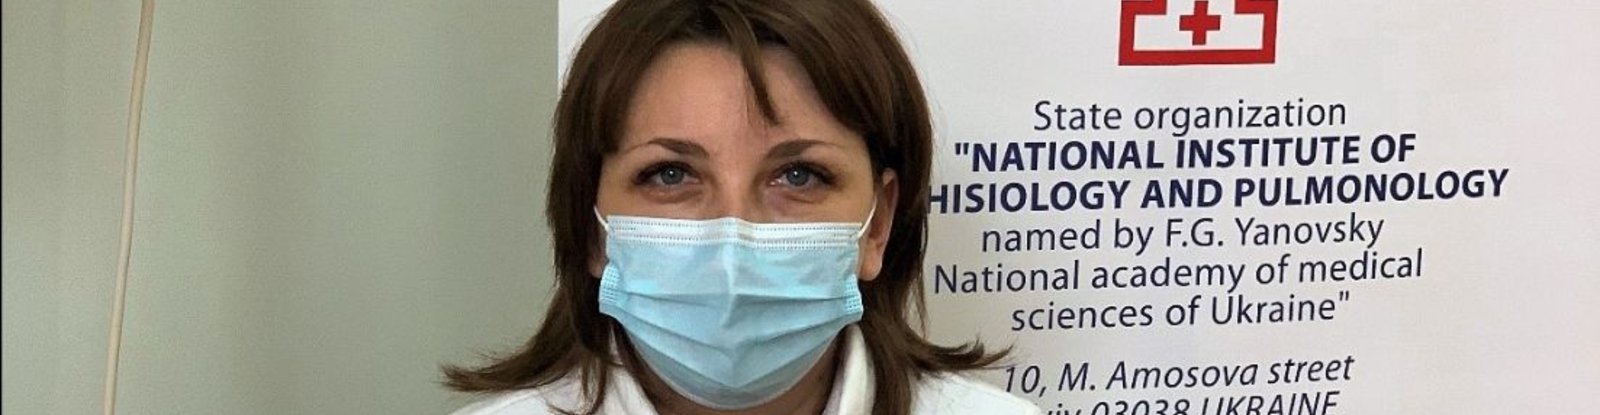 People with TB in Ukraine are the first to receive groundbreaking new BPal drug regimen